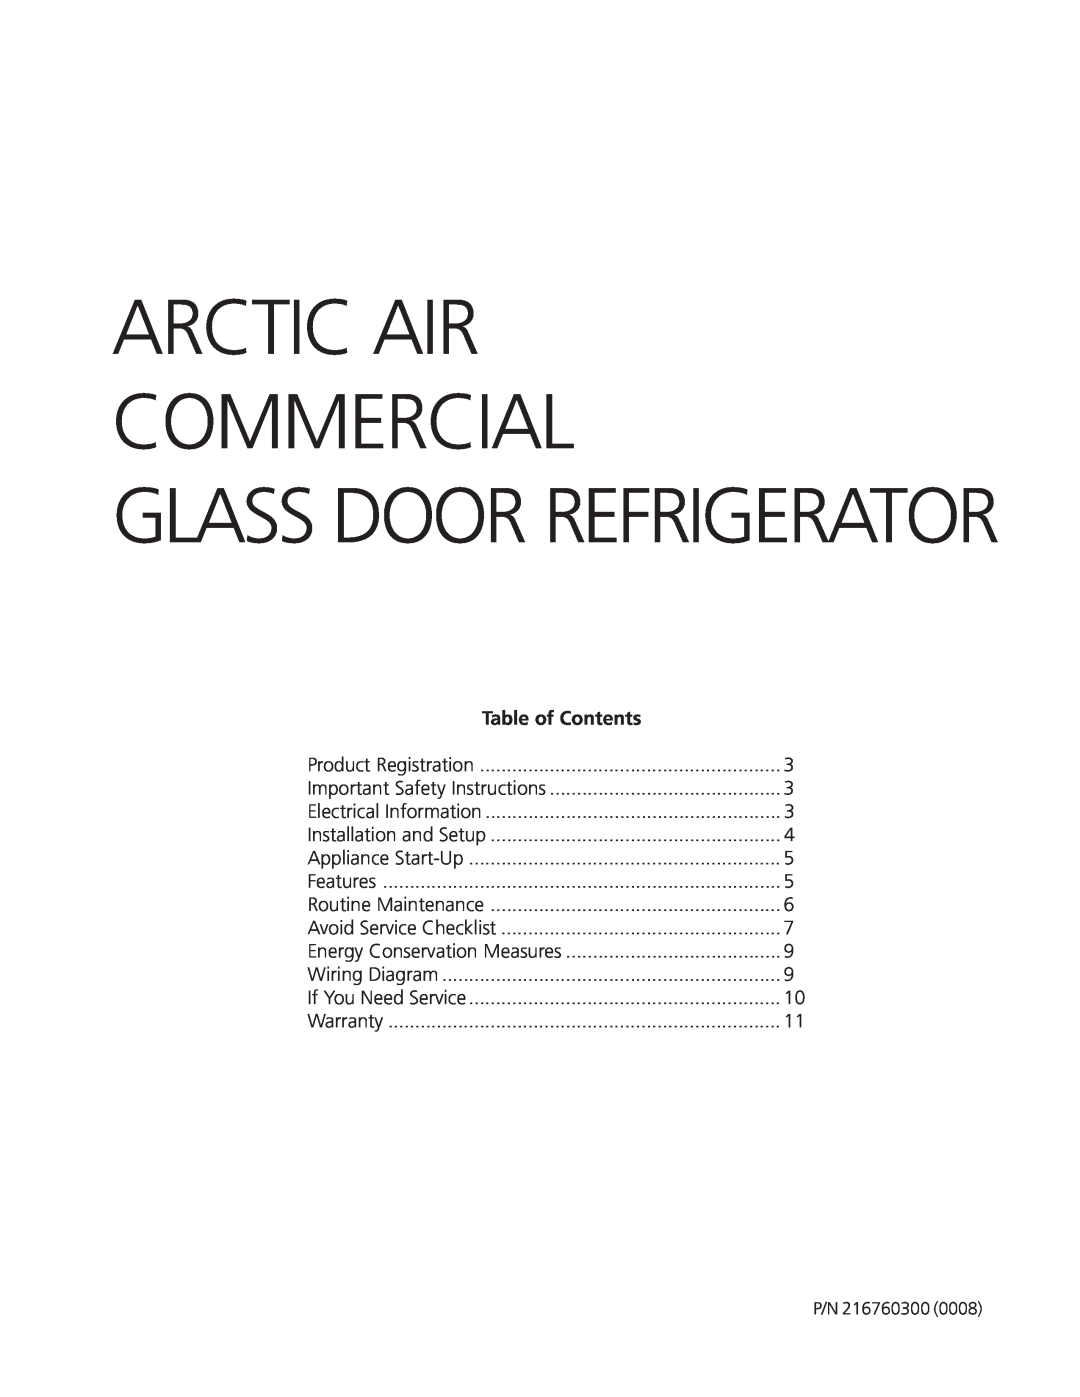 Frigidaire Artic Air Commerical Glass Door Refrigerator important safety instructions Table of Contents, Features 